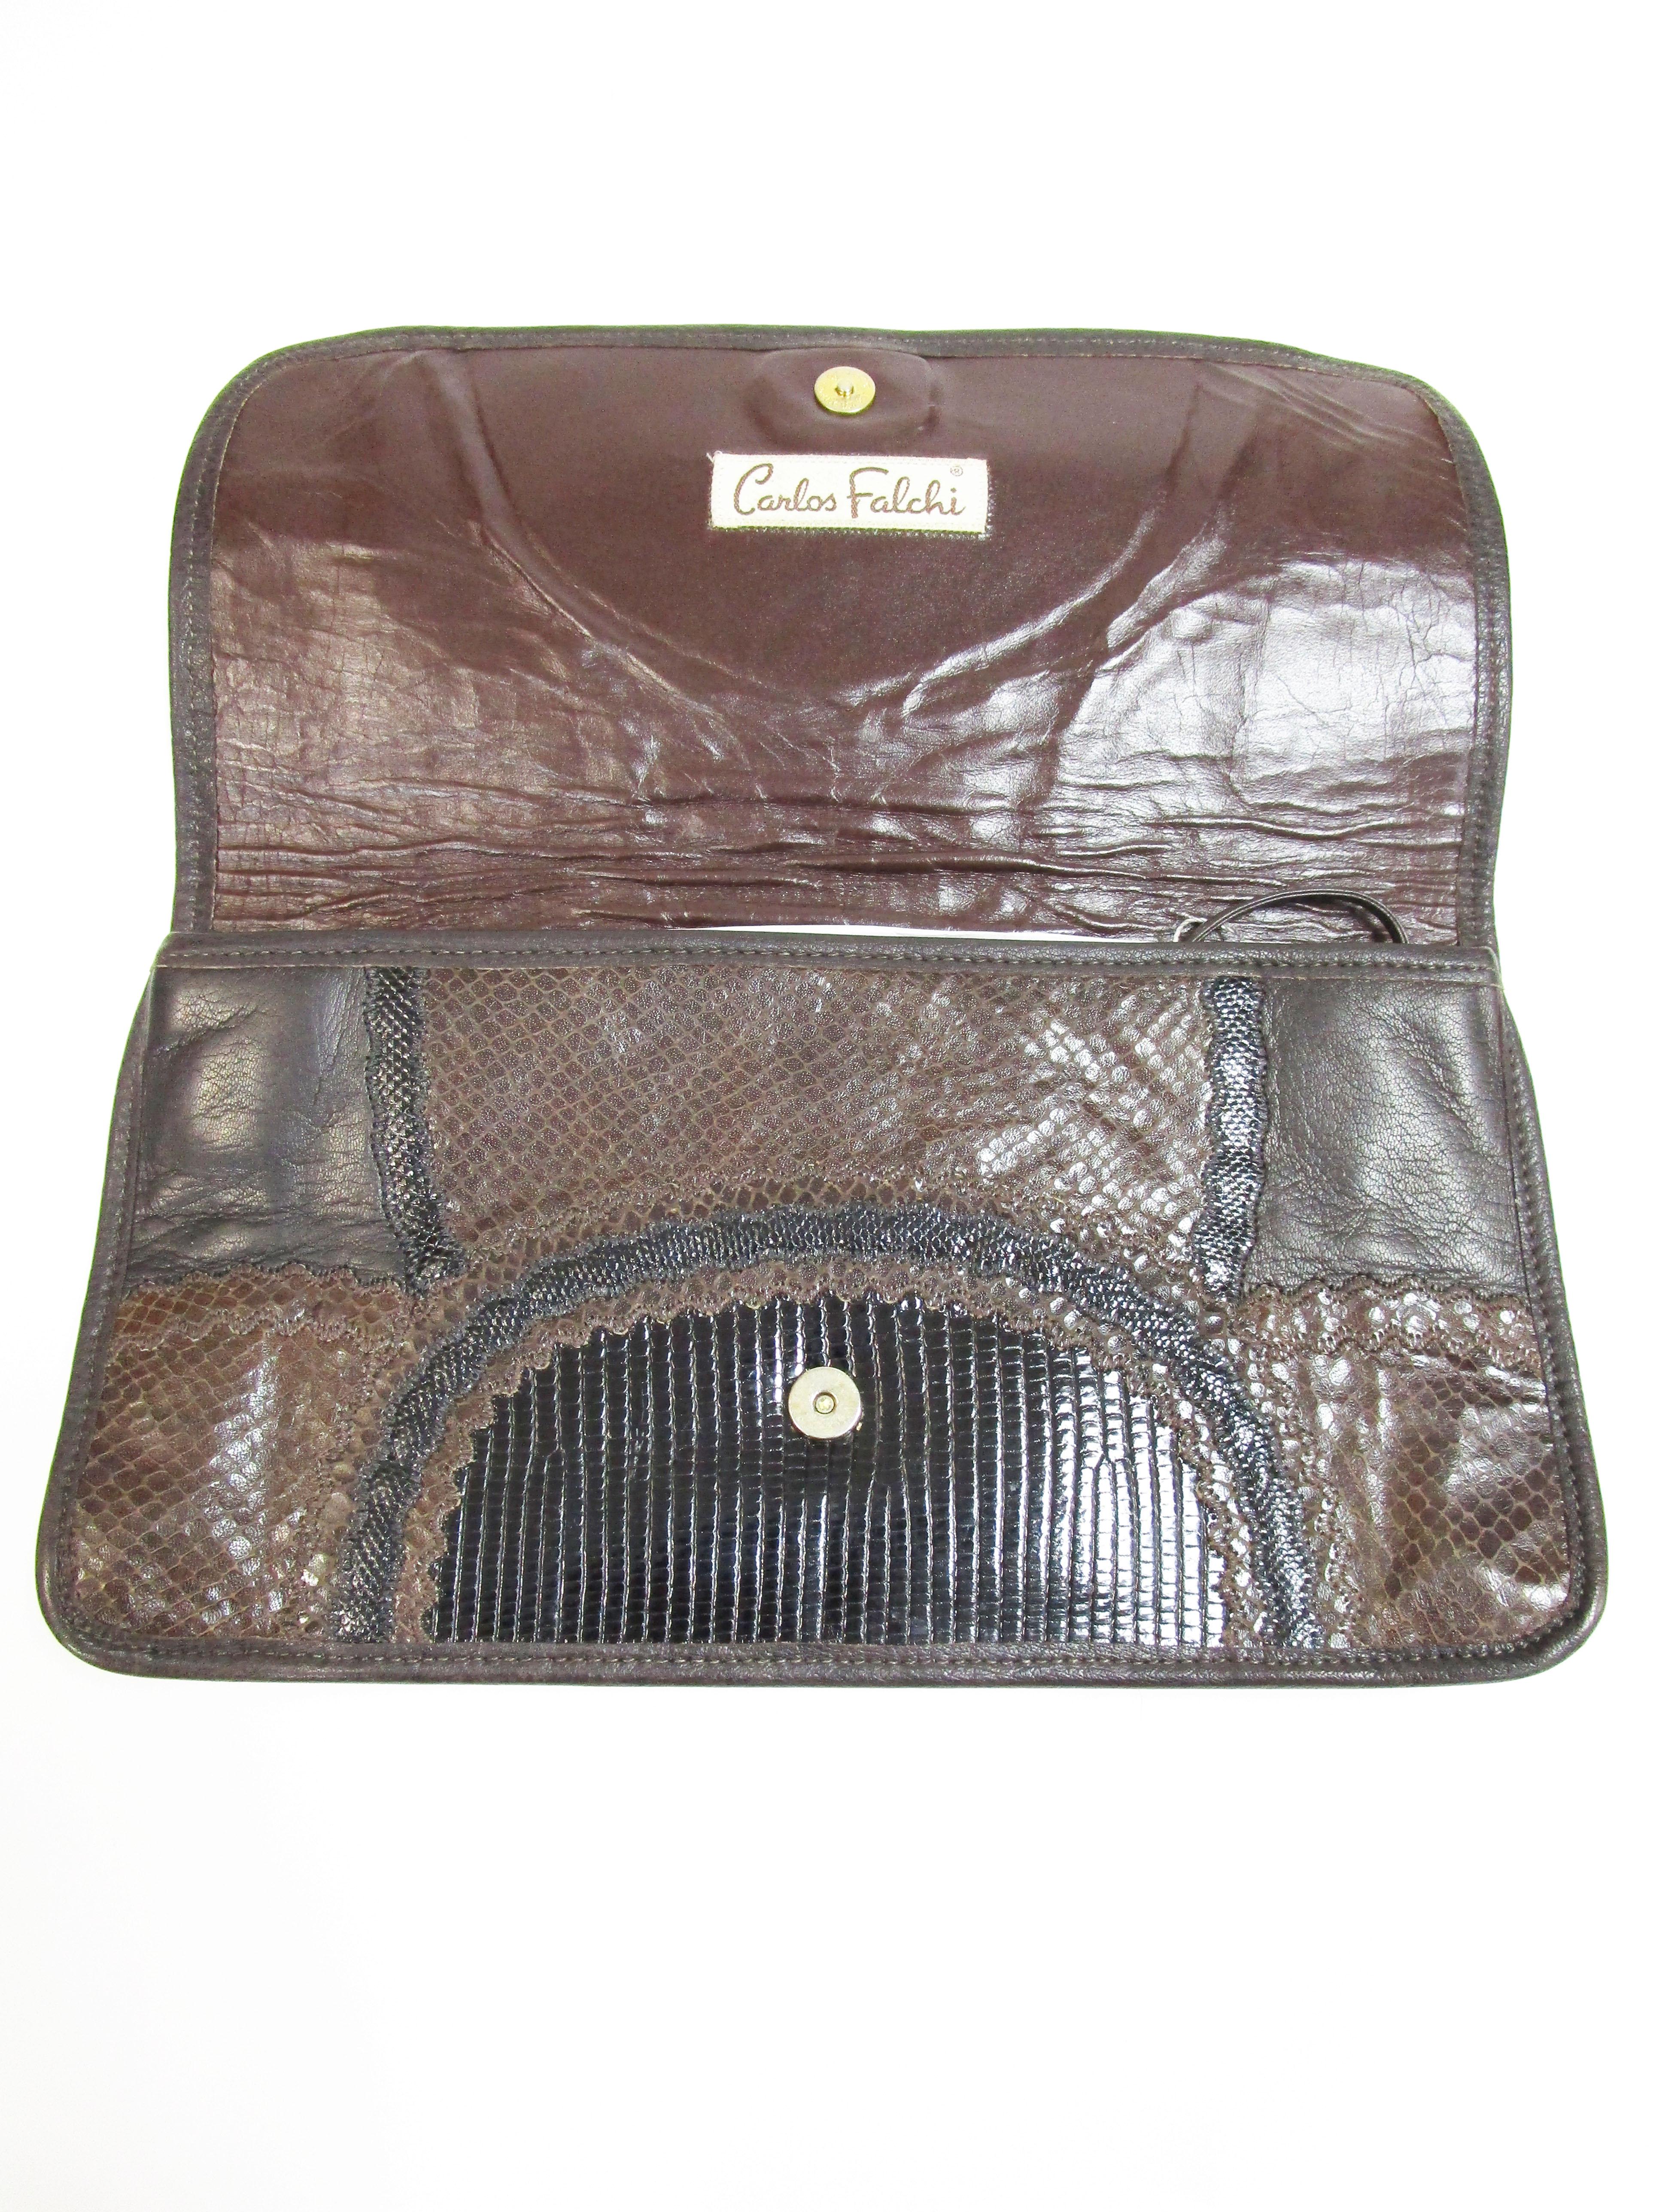 Carols Falchi created this clutch with multiple skins including Lizard, Snake and leather in brown and black. There is a leather strap if you want to use it as a shoulder bag. Large enough for a phone. Can be used for daytime or evening. 


Strap